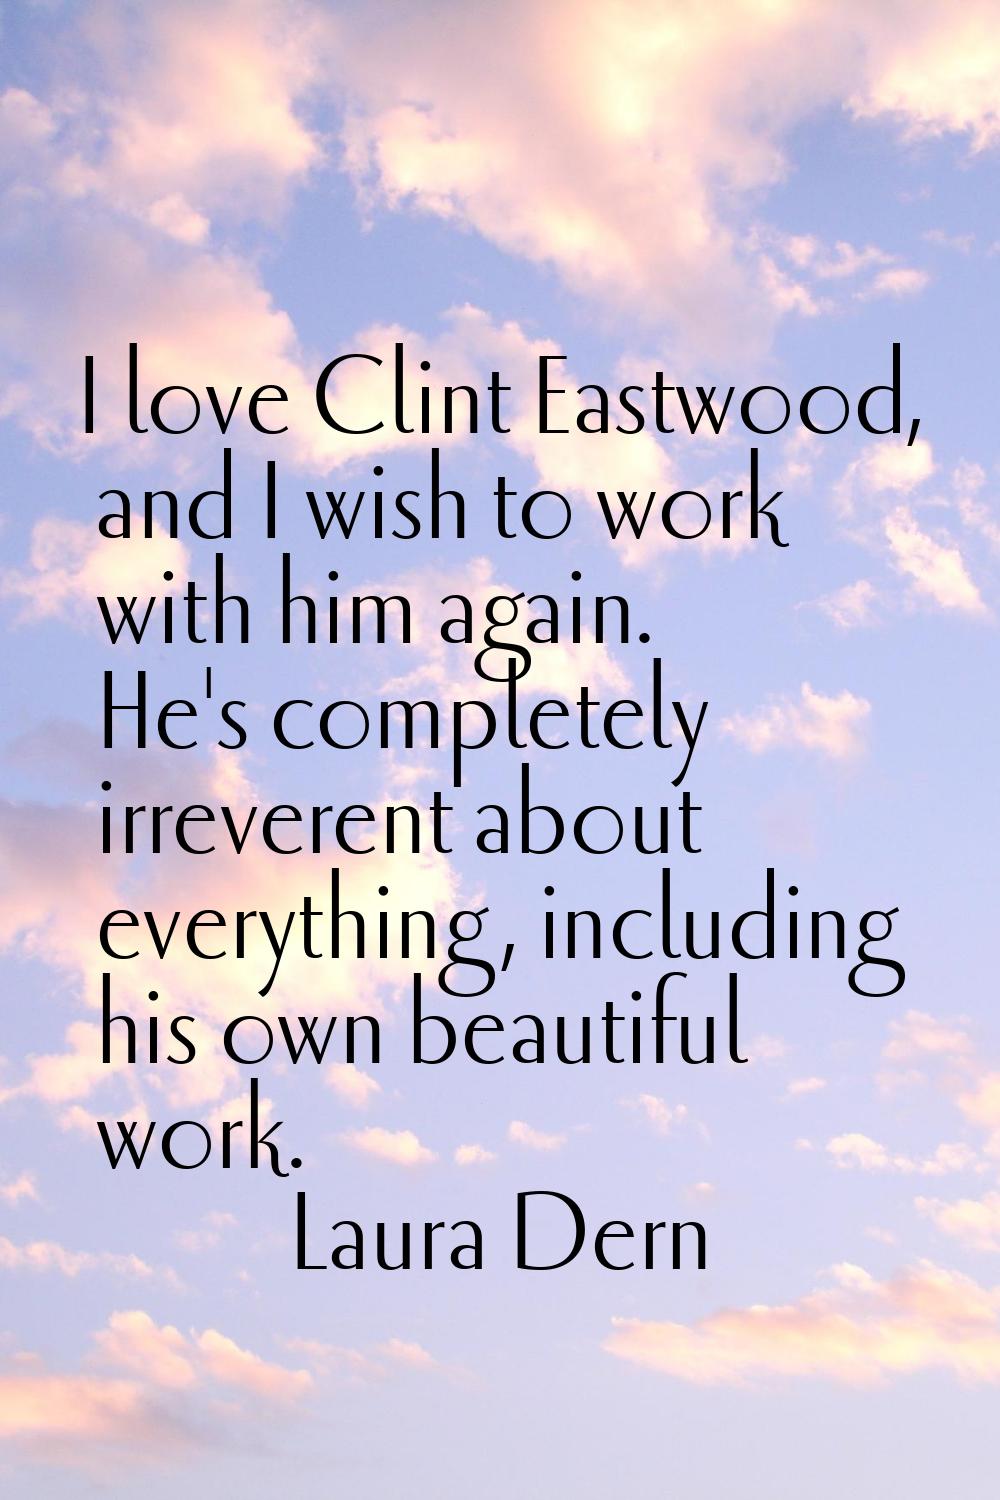 I love Clint Eastwood, and I wish to work with him again. He's completely irreverent about everythi